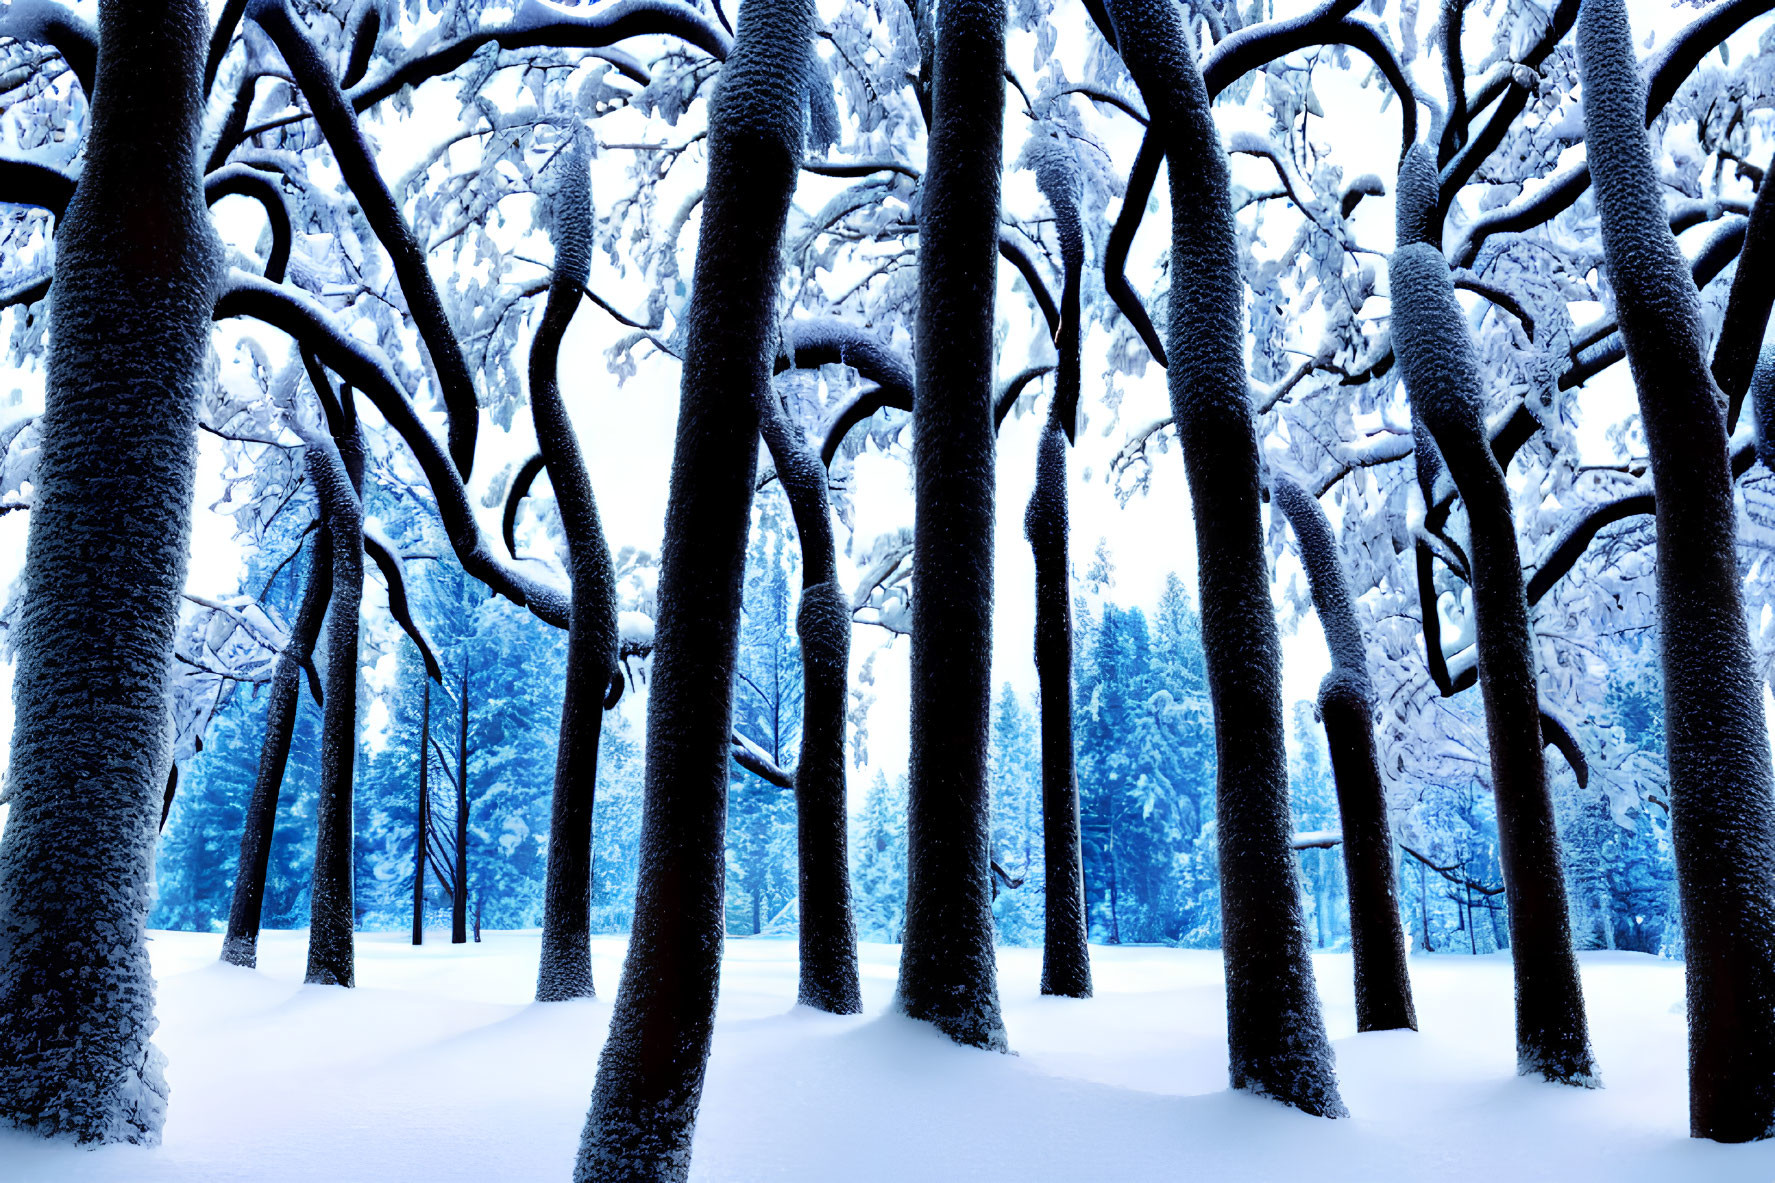 Serene wintry forest with snow-covered trees